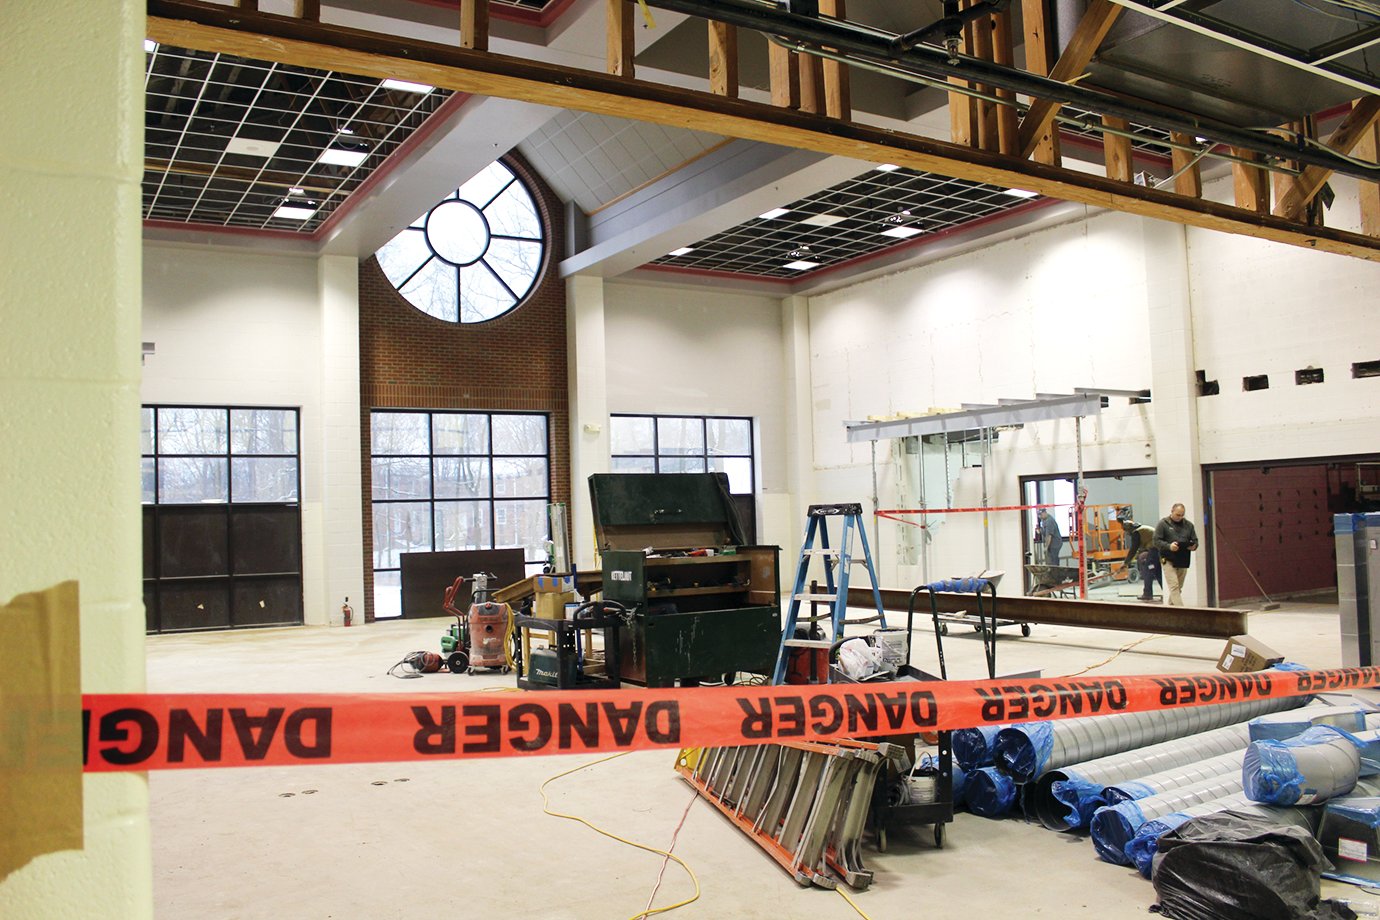 The media center at Crawfordsville High School undergoes transformation as part of the school district's ongoing renovation project.